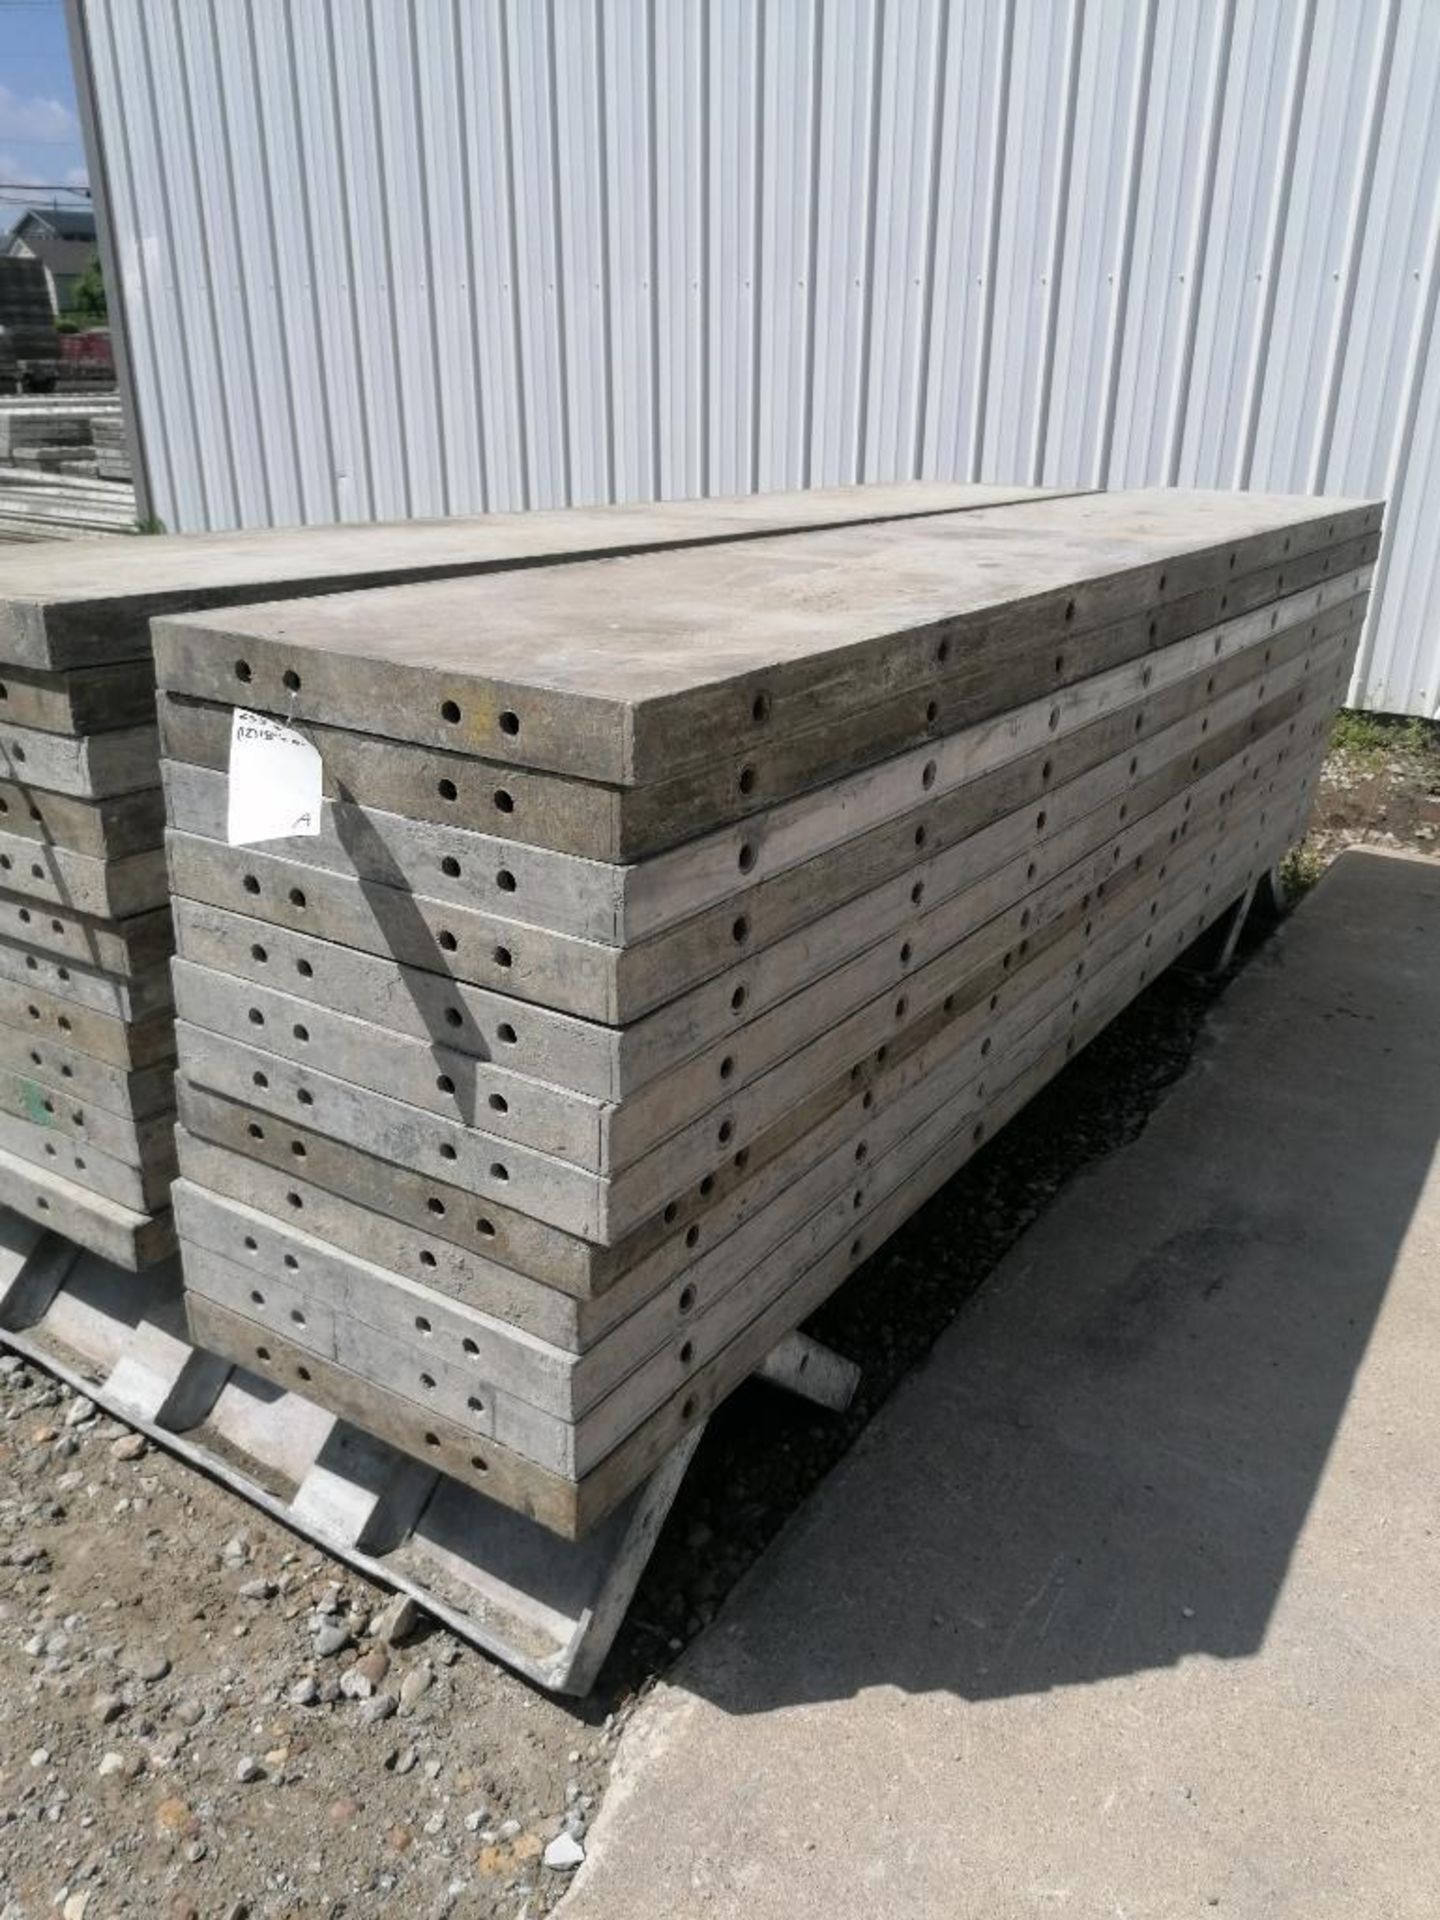 (12) 18" x 8' Wall-Ties Smooth Aluminum Concrete Forms 6-12 Hole Pattern. Located in Mt. Pleasant,